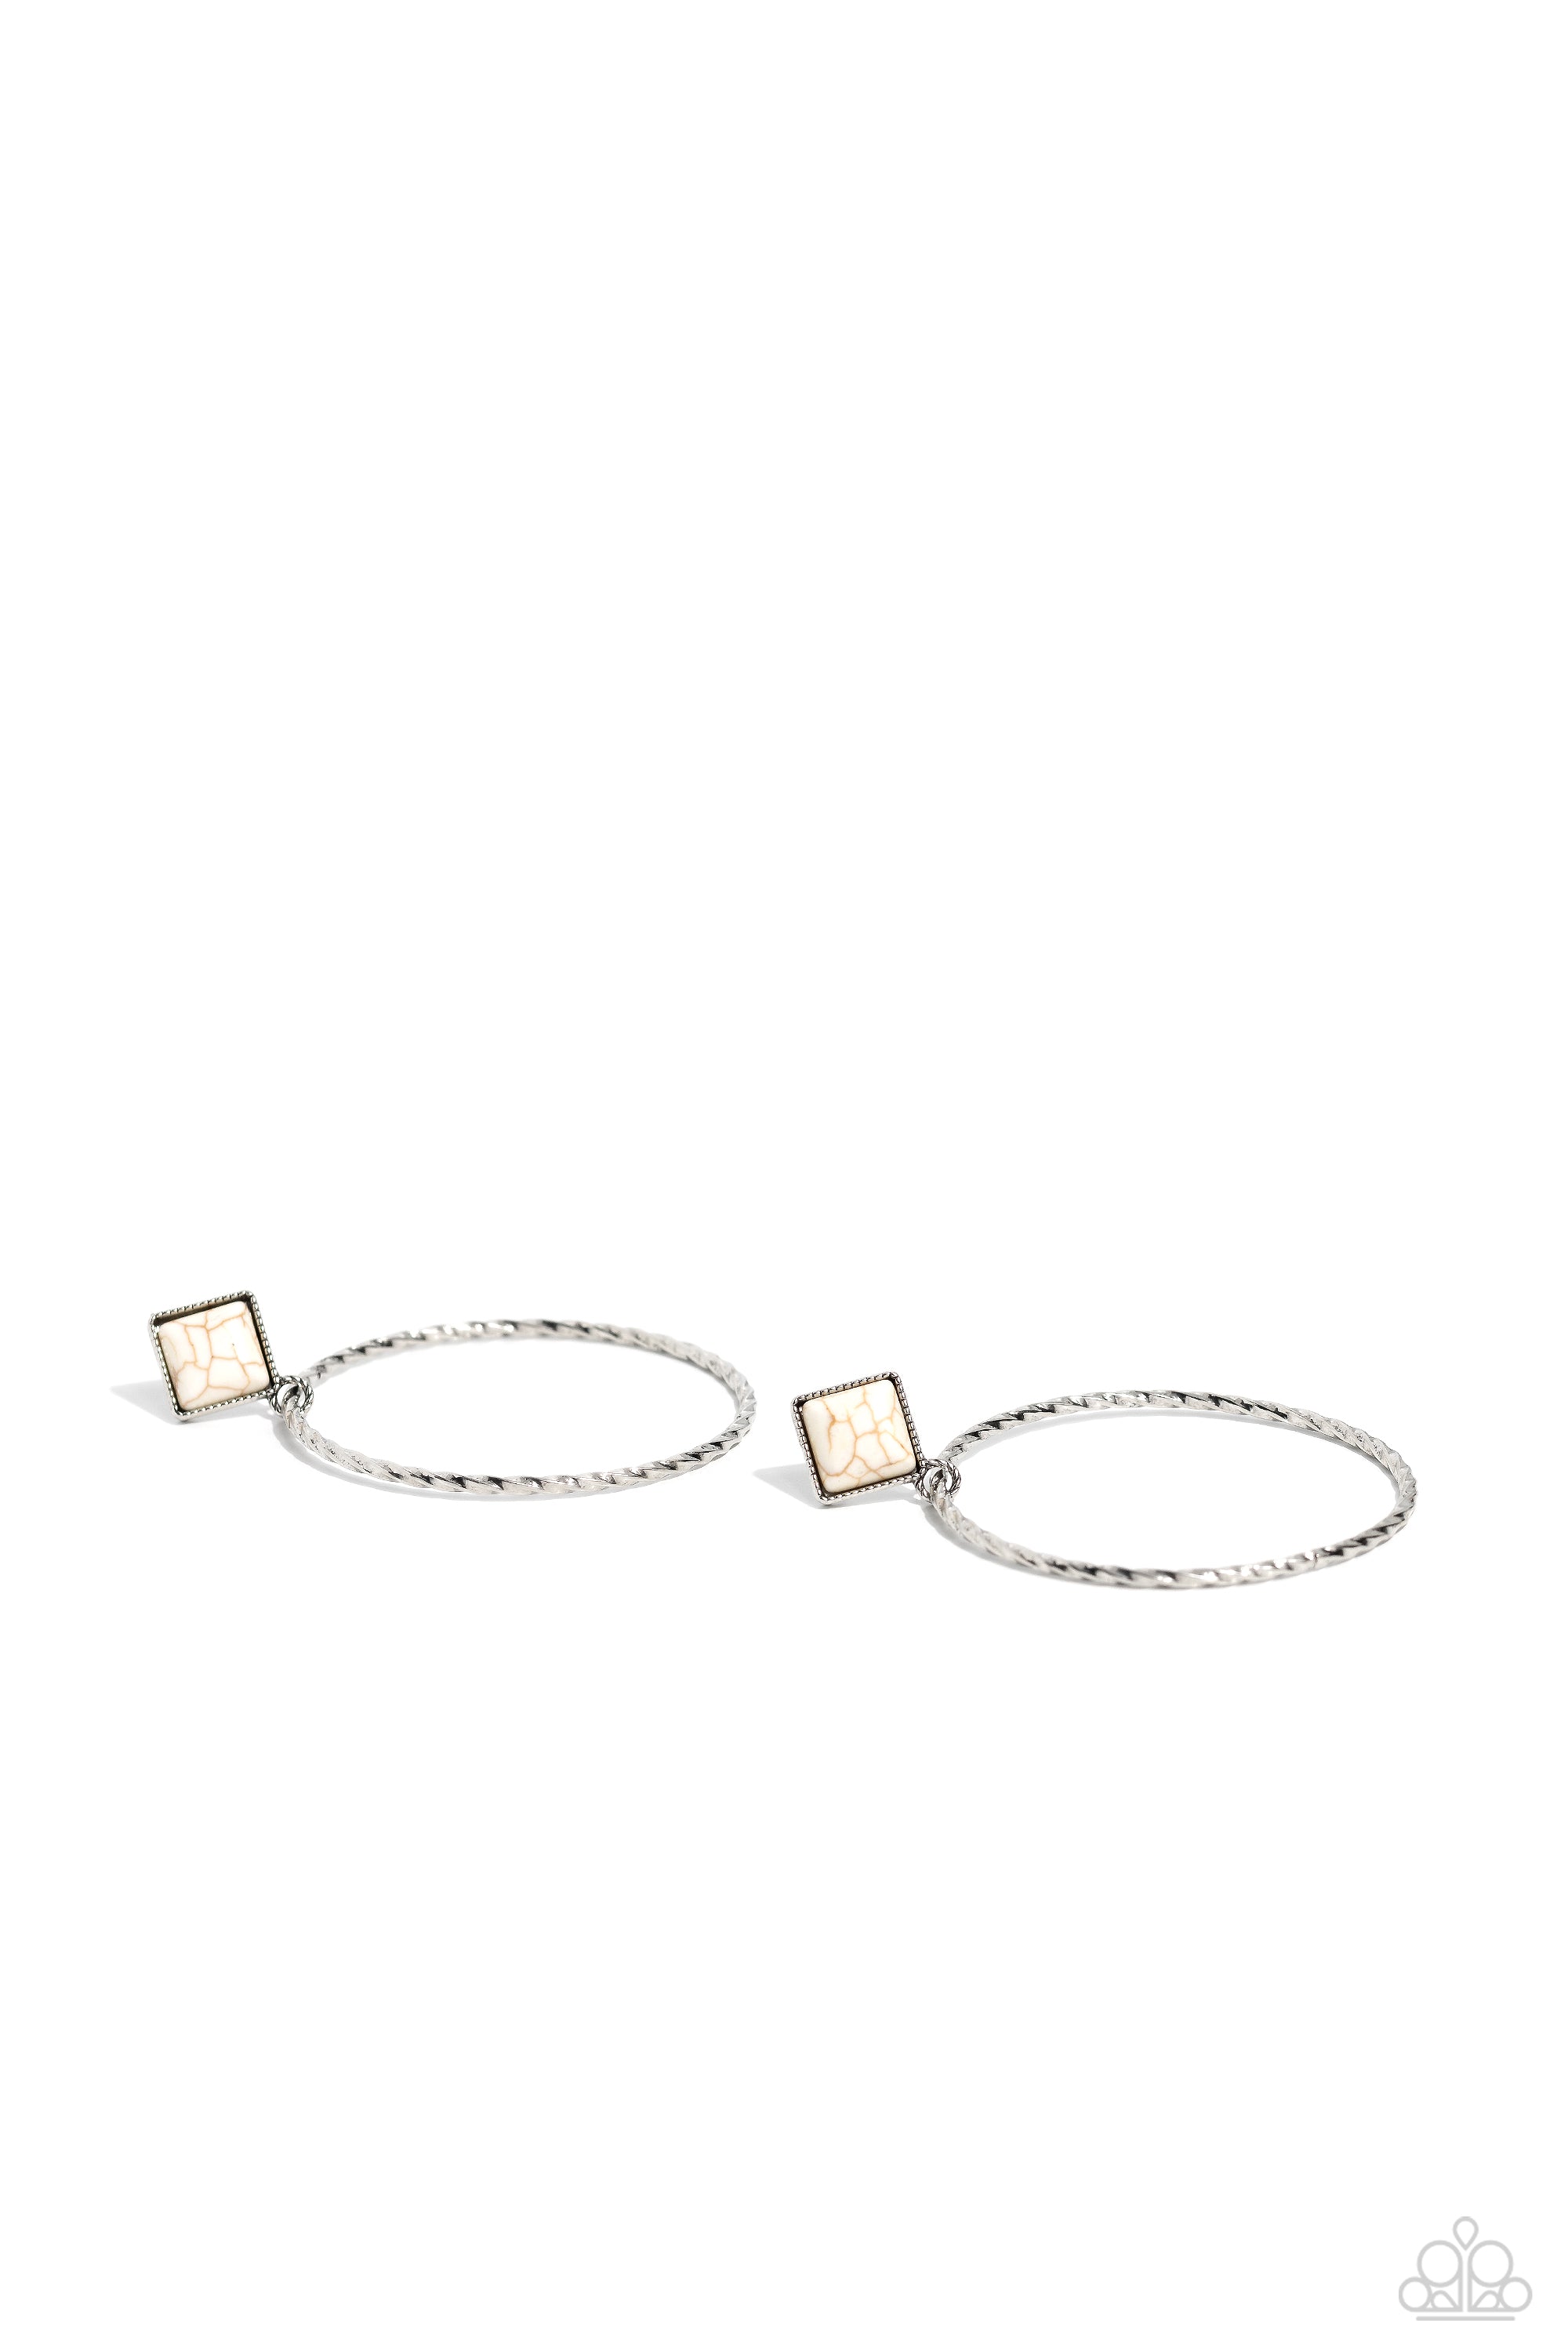 Canyon Circlet White Stone Earrings - Paparazzi Accessories- lightbox - CarasShop.com - $5 Jewelry by Cara Jewels